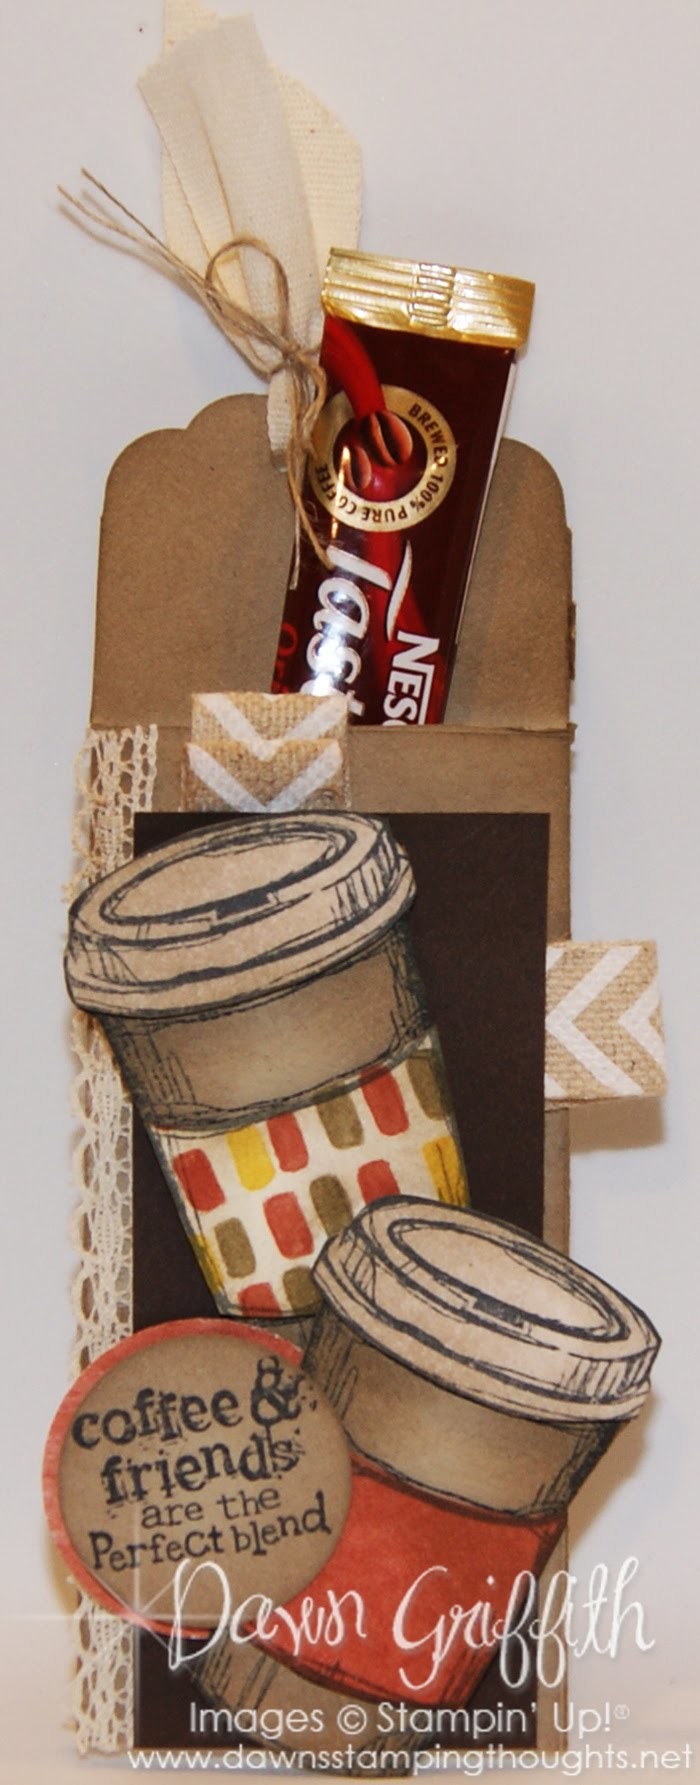 ScallopTag Coffee Packet Holder with Dawn